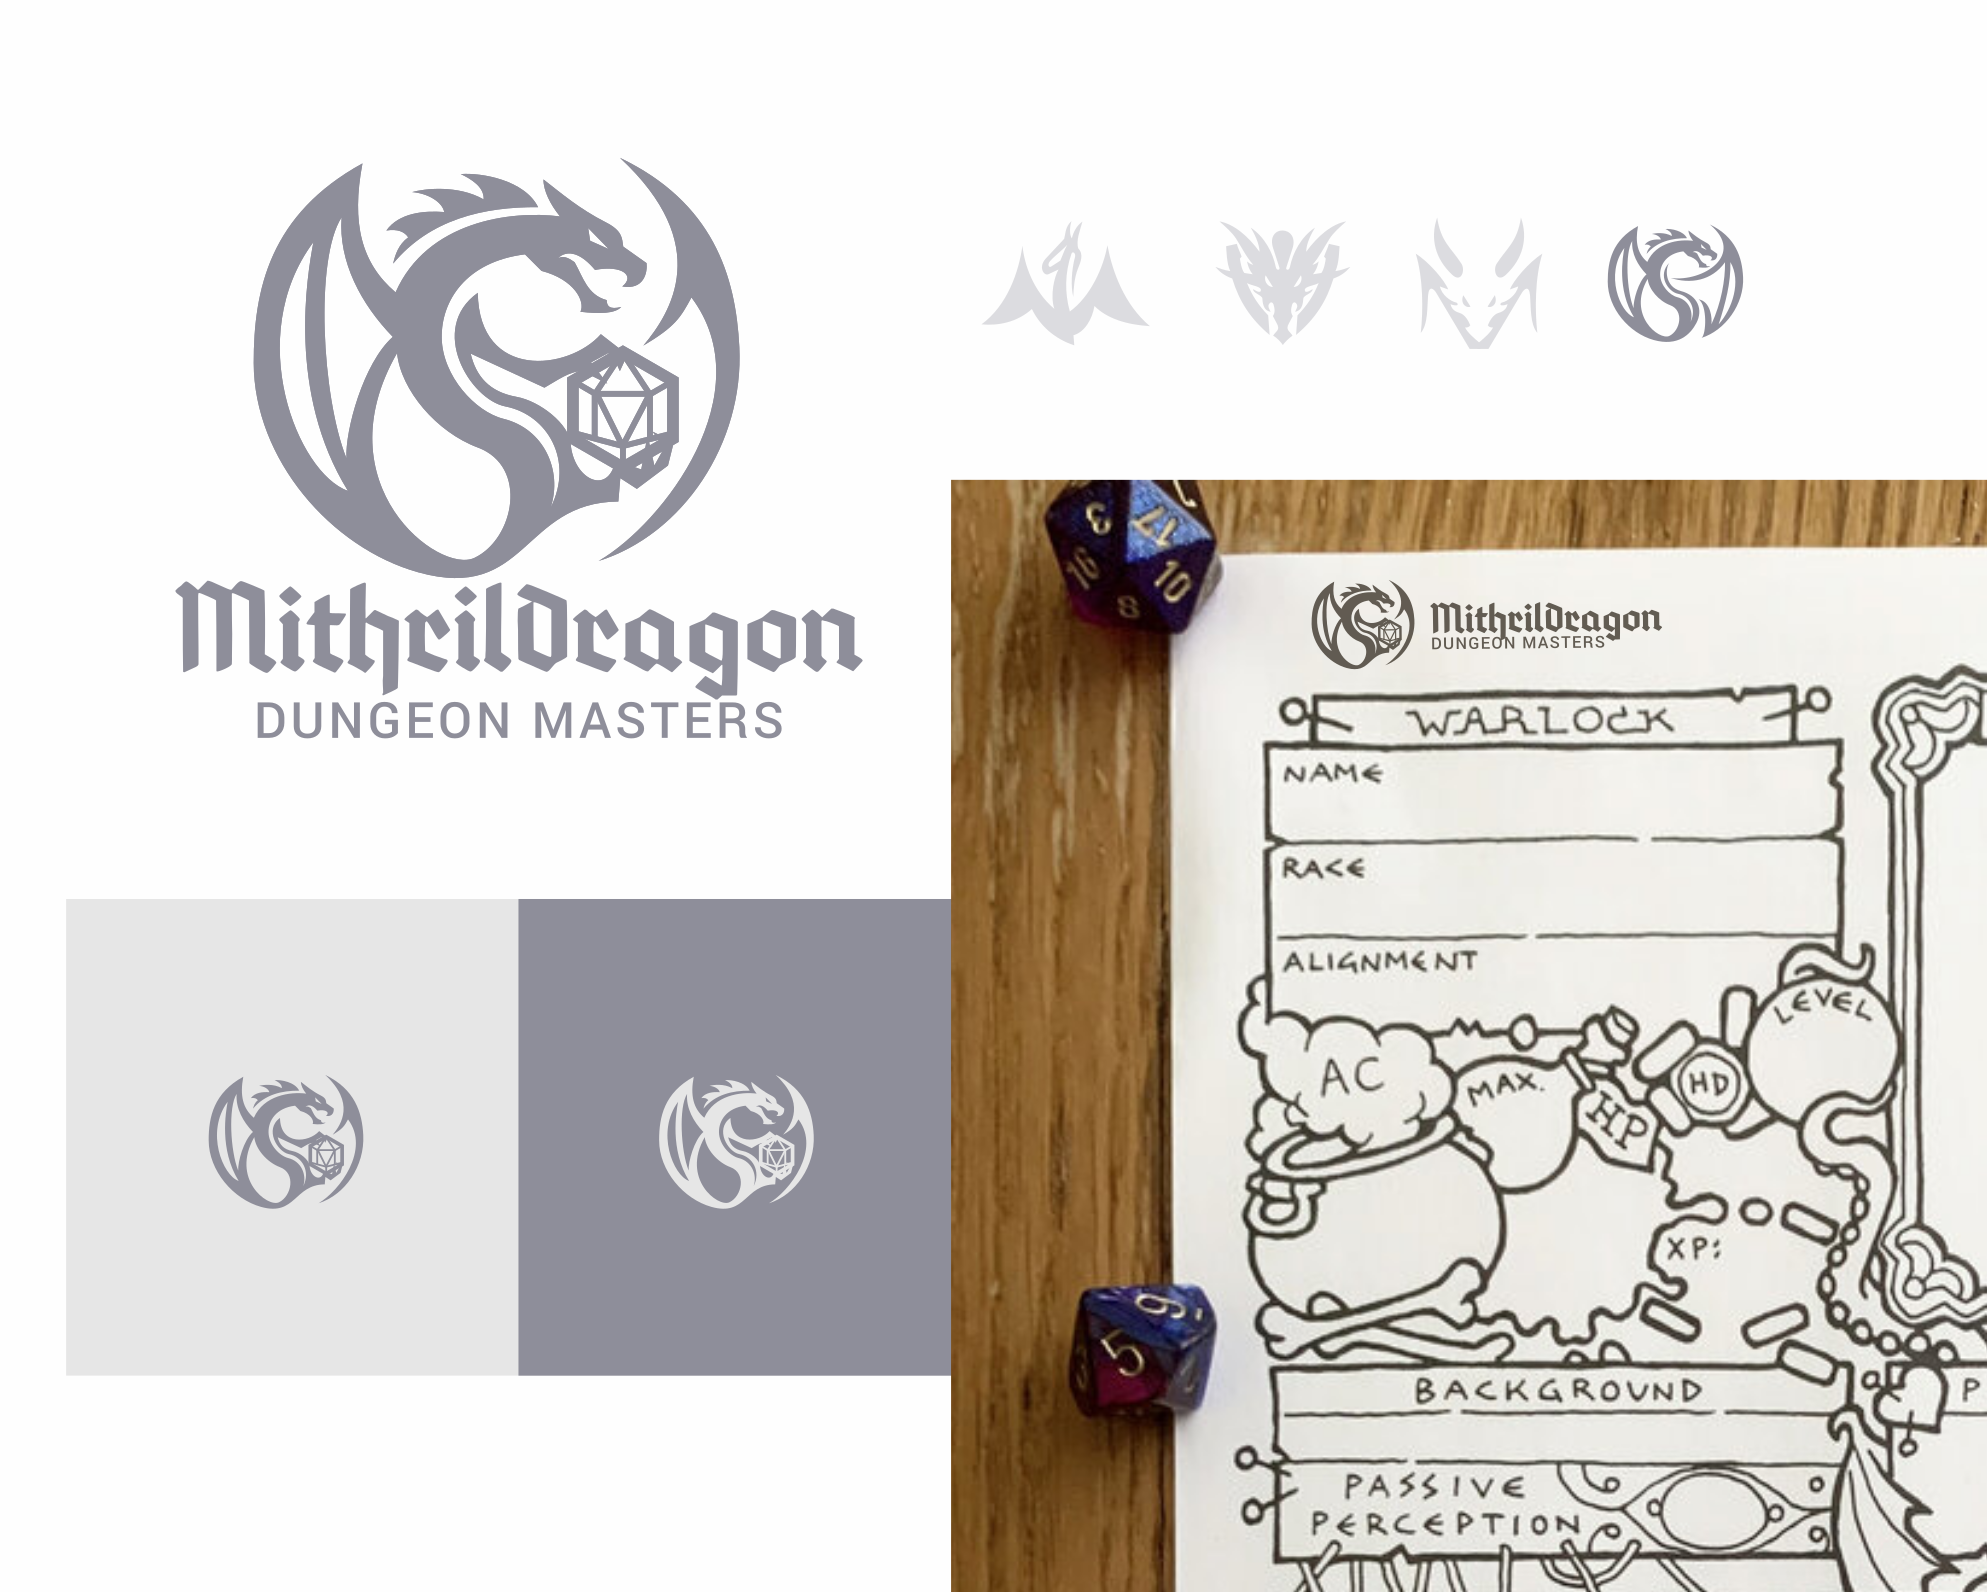 Logo design and showcase for Mithril Dragon Dungeon Masters. Designed by Johnery